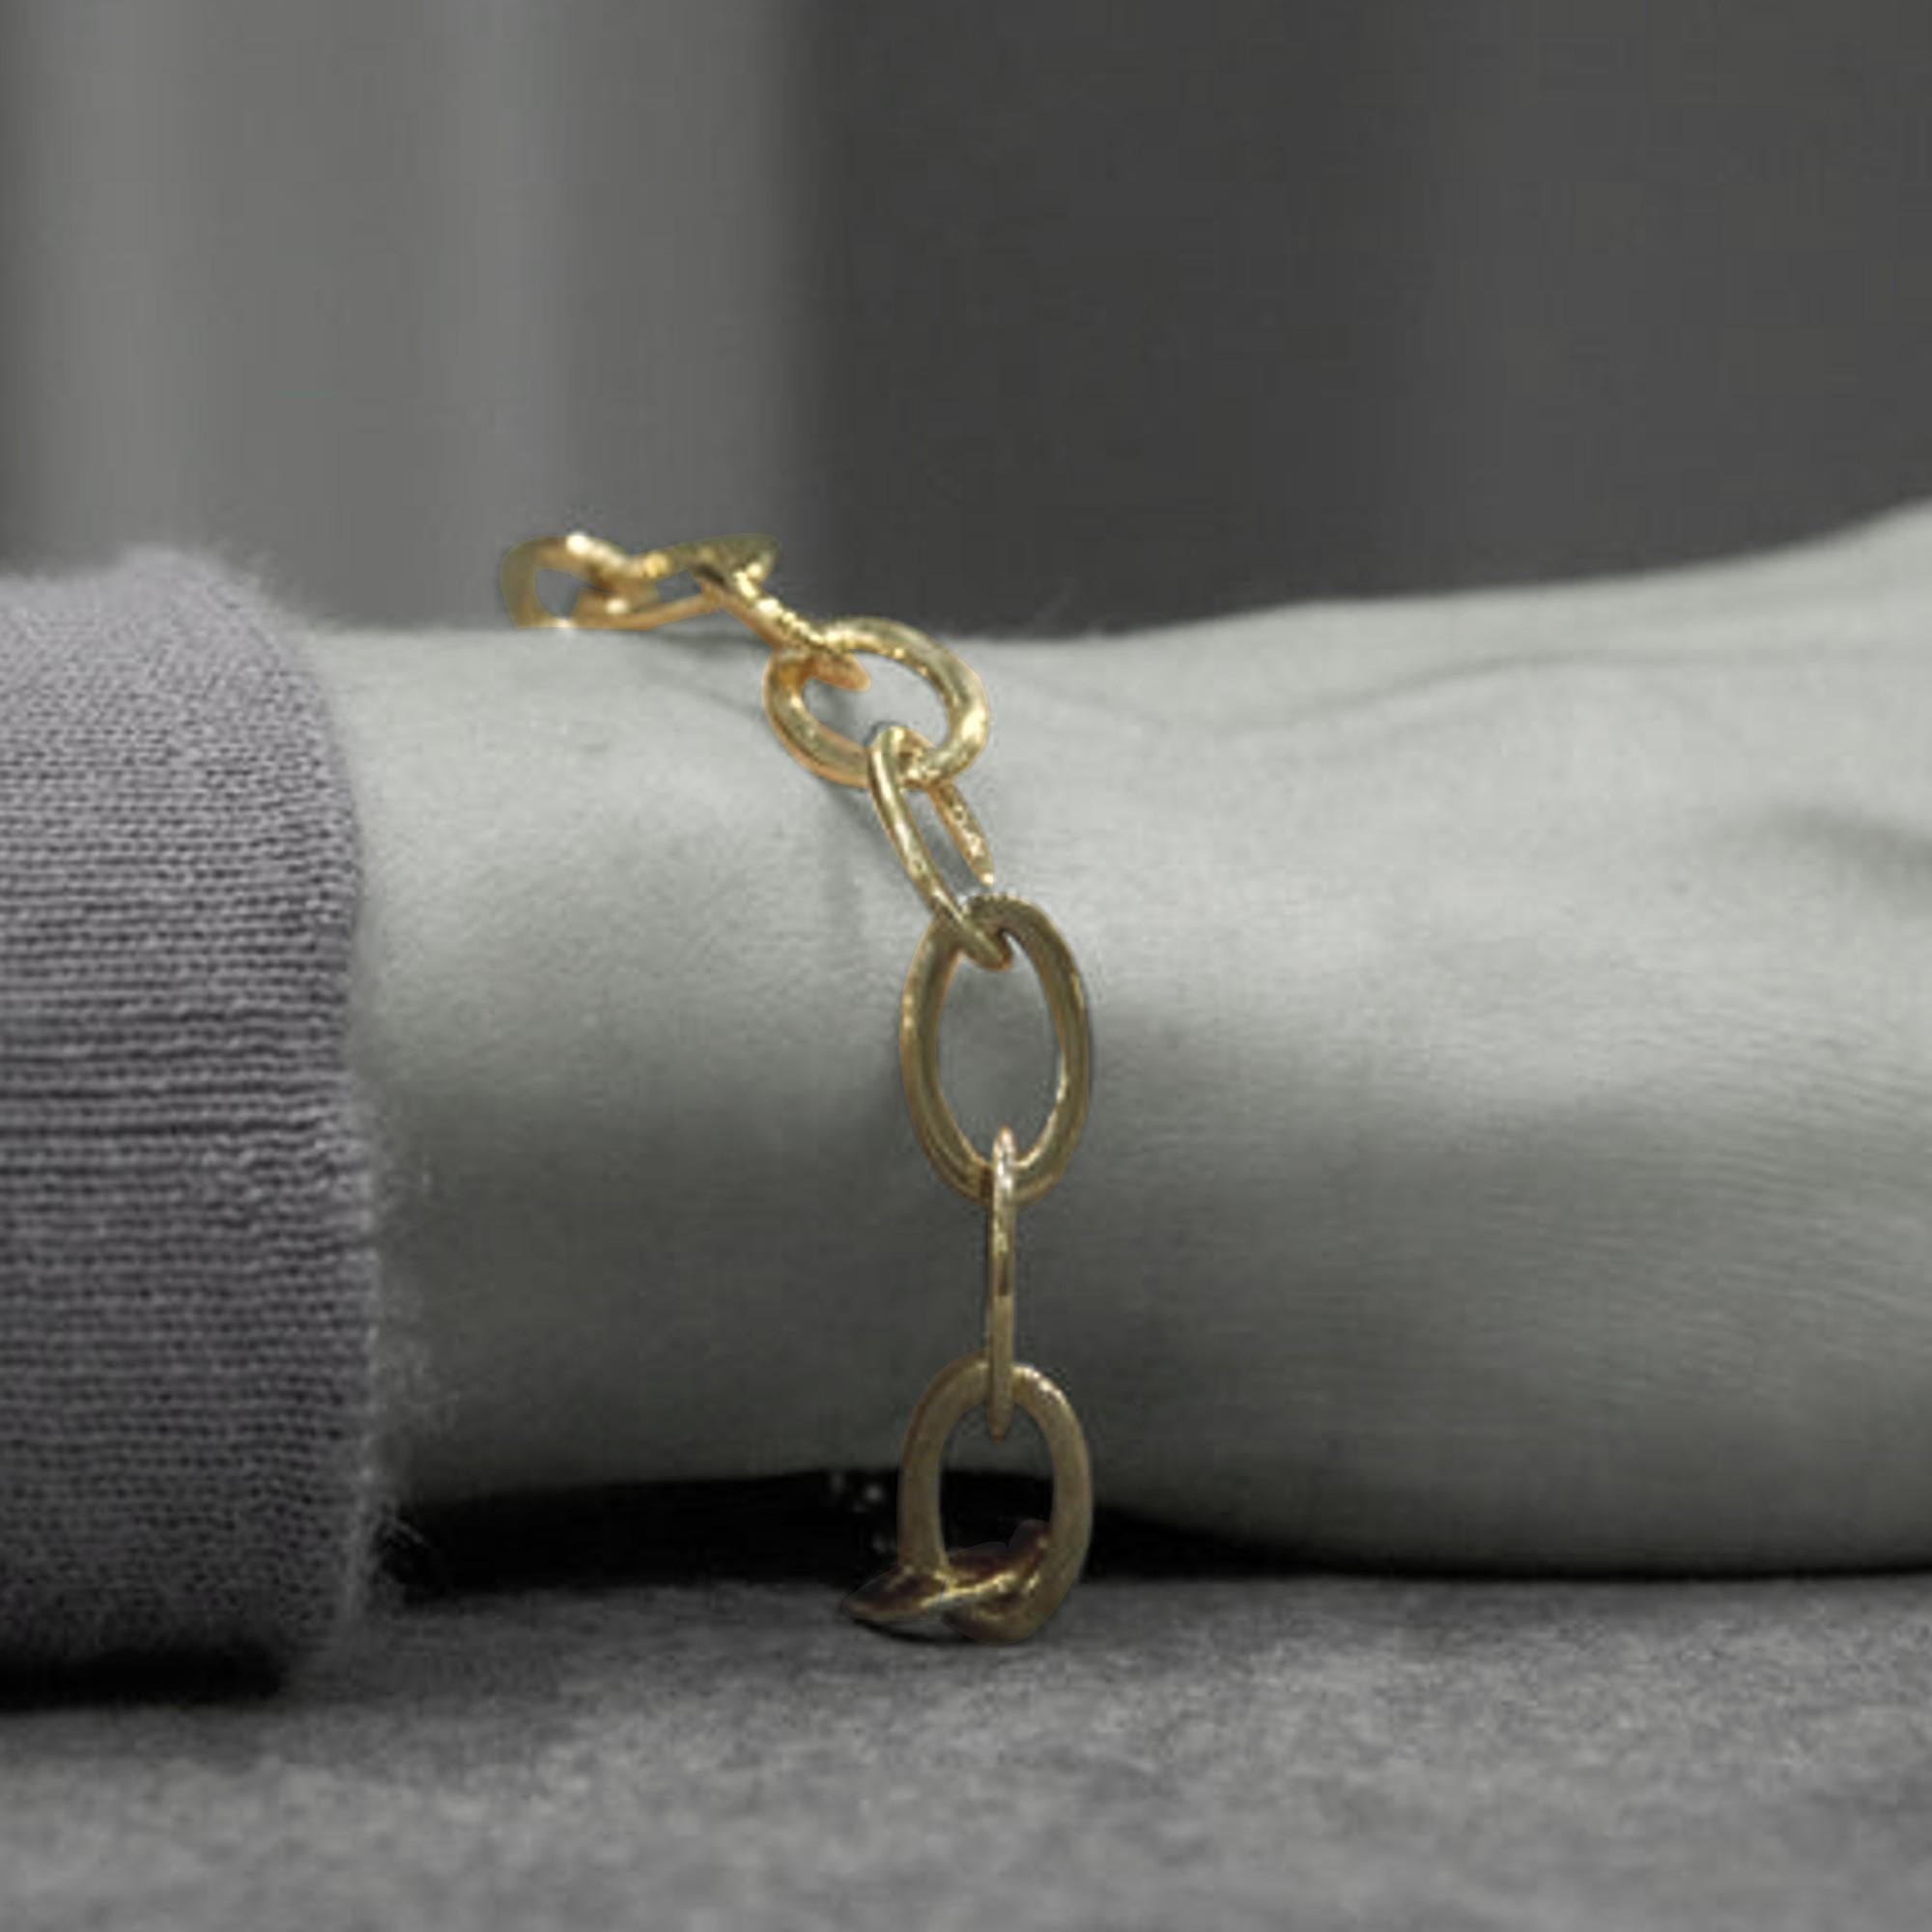 Alex Jona design collection, hand crafted in Italy, 18 karat yellow gold chain bracelet.
Dimension : L 19.5 cm X W 9.25 mm
L 7.68 in X W 0.36 in
Weight : 9.1 gr

Alex Jona jewels stand out, not only for their special design and for the excellent